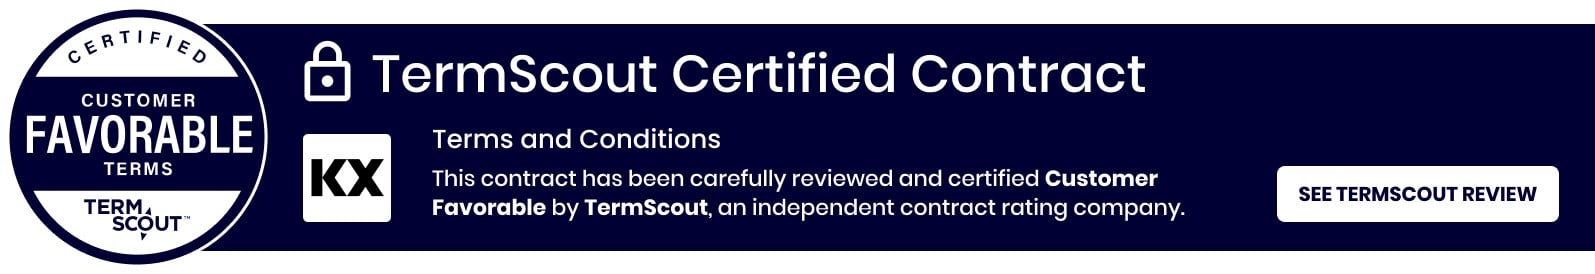 TermScout Certified Contract - Terms & Conditions